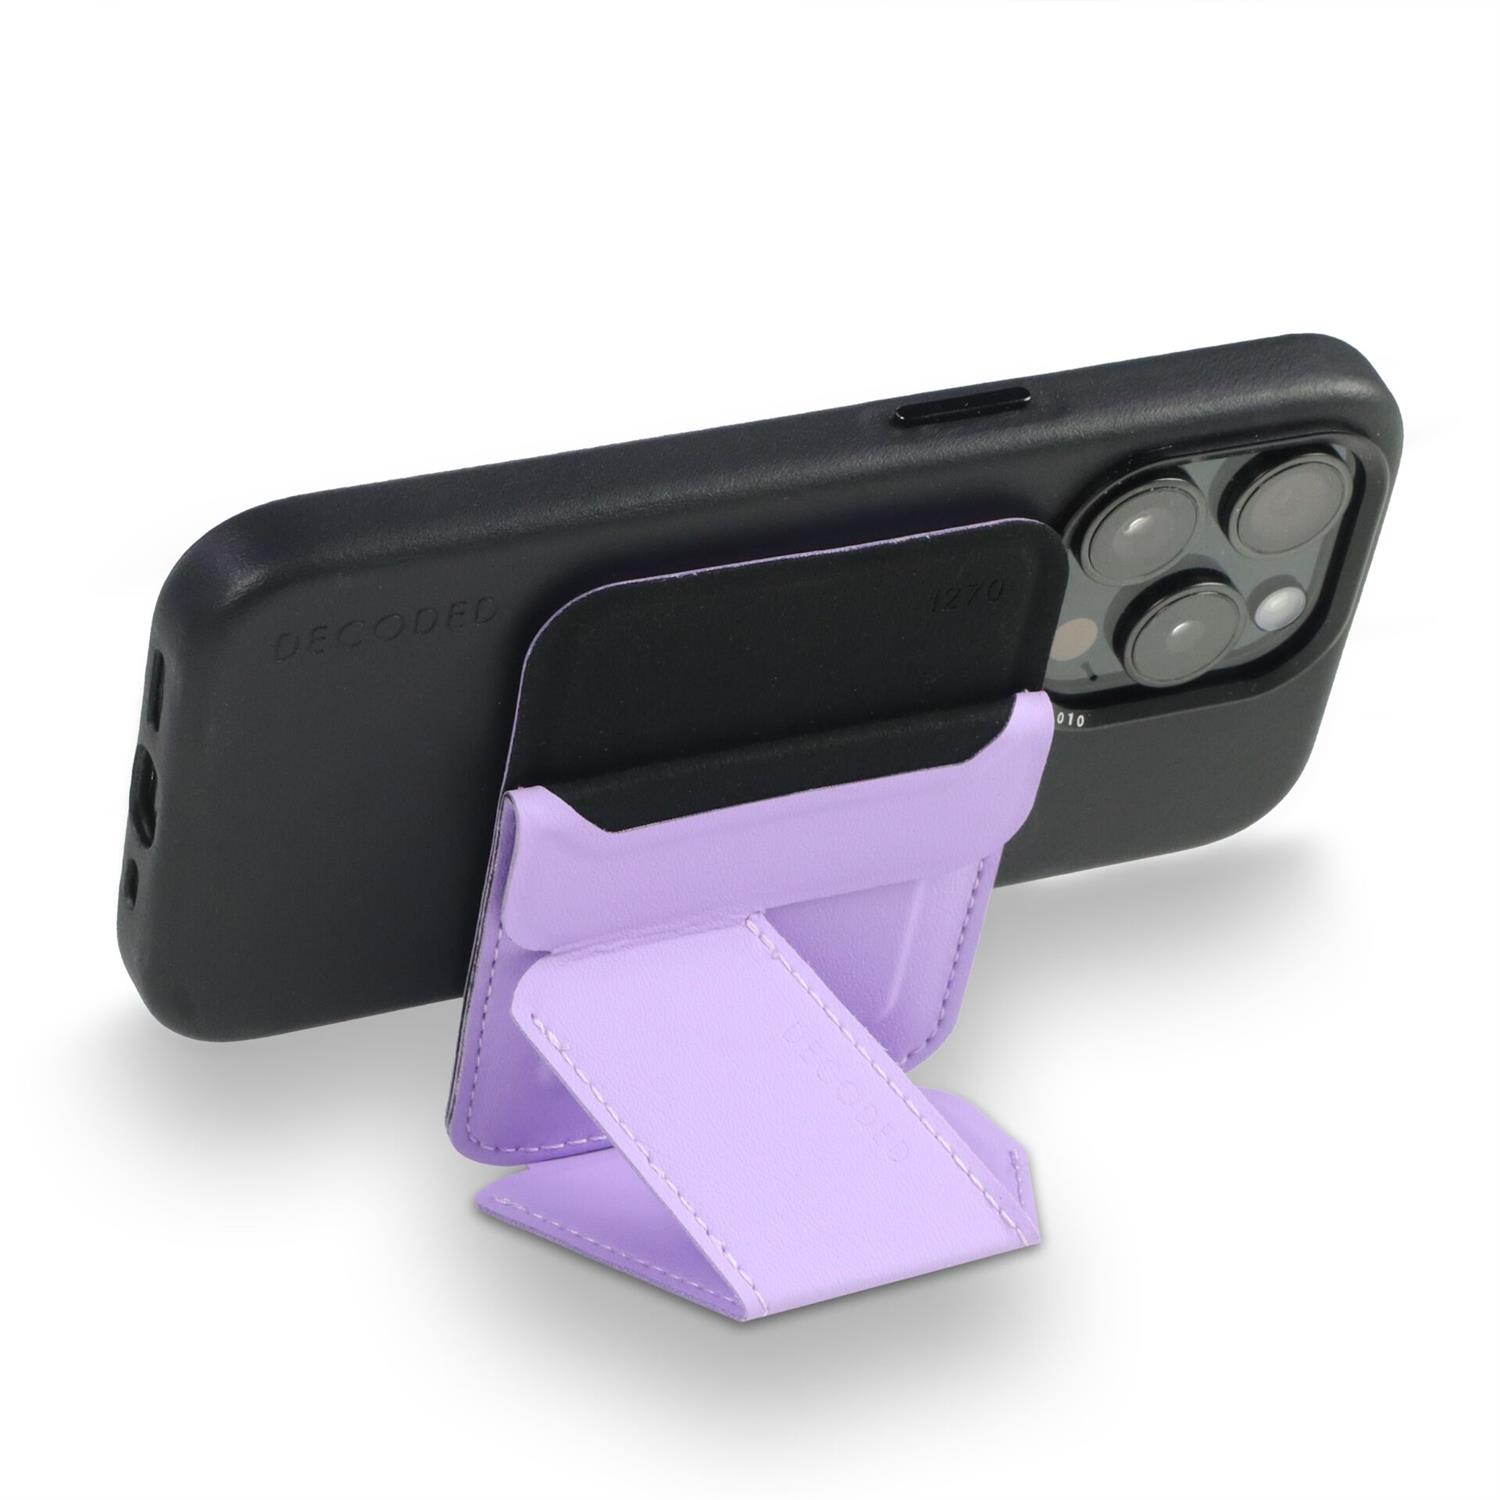 Decoded Silicone MagSafe Card Stand Sleeve - Dig. Lavender